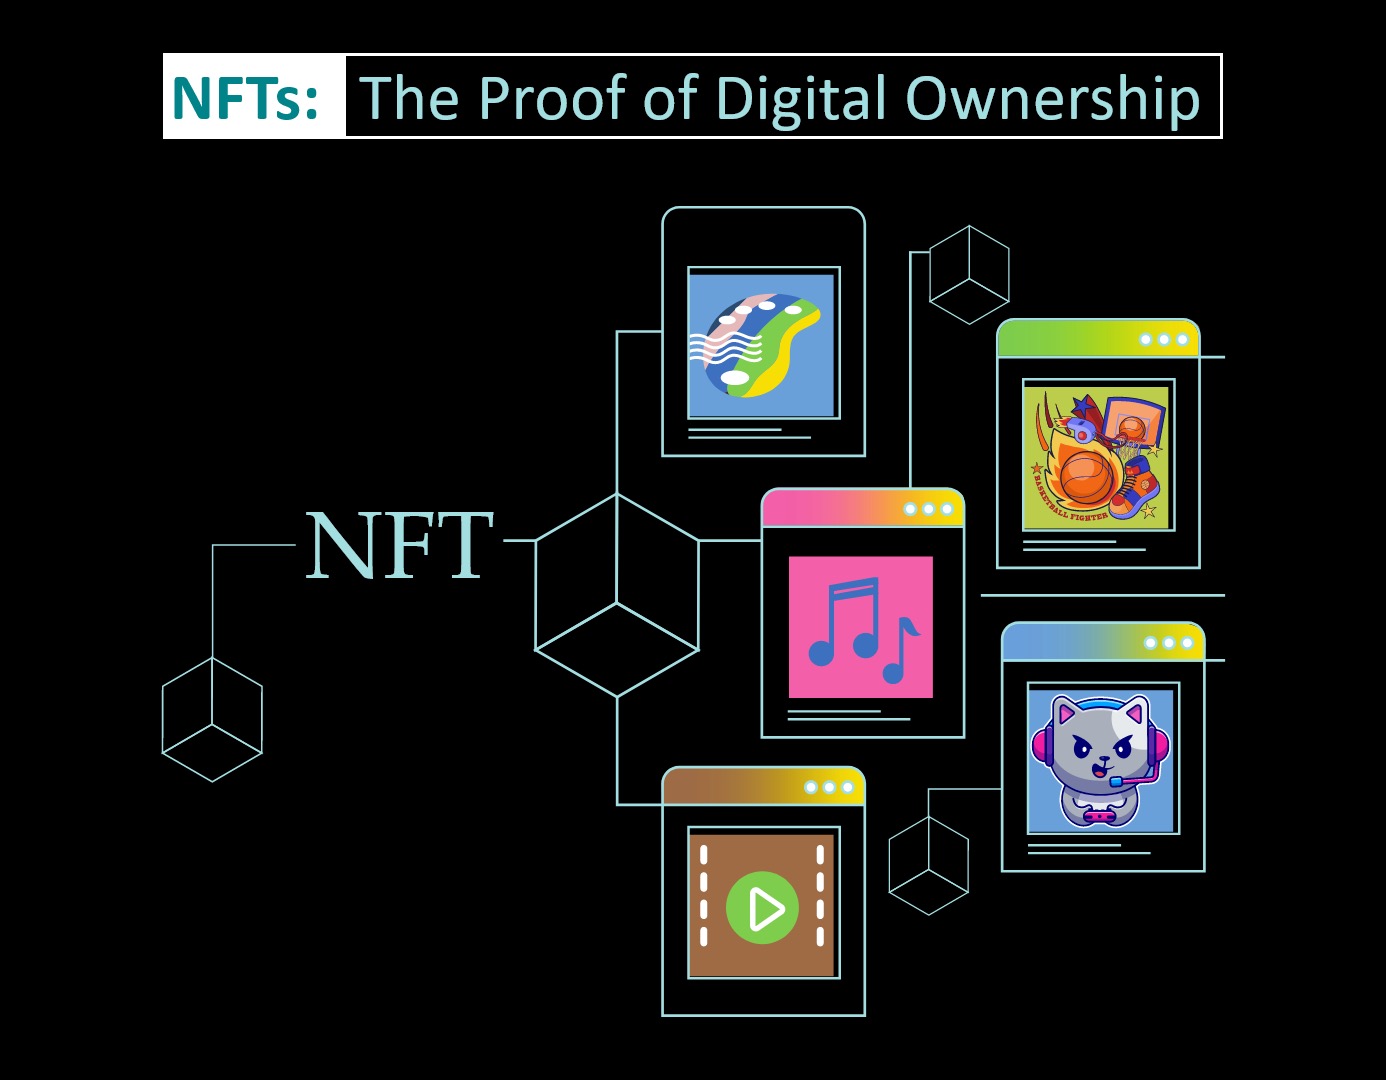 NFTs: The proof of digital ownership